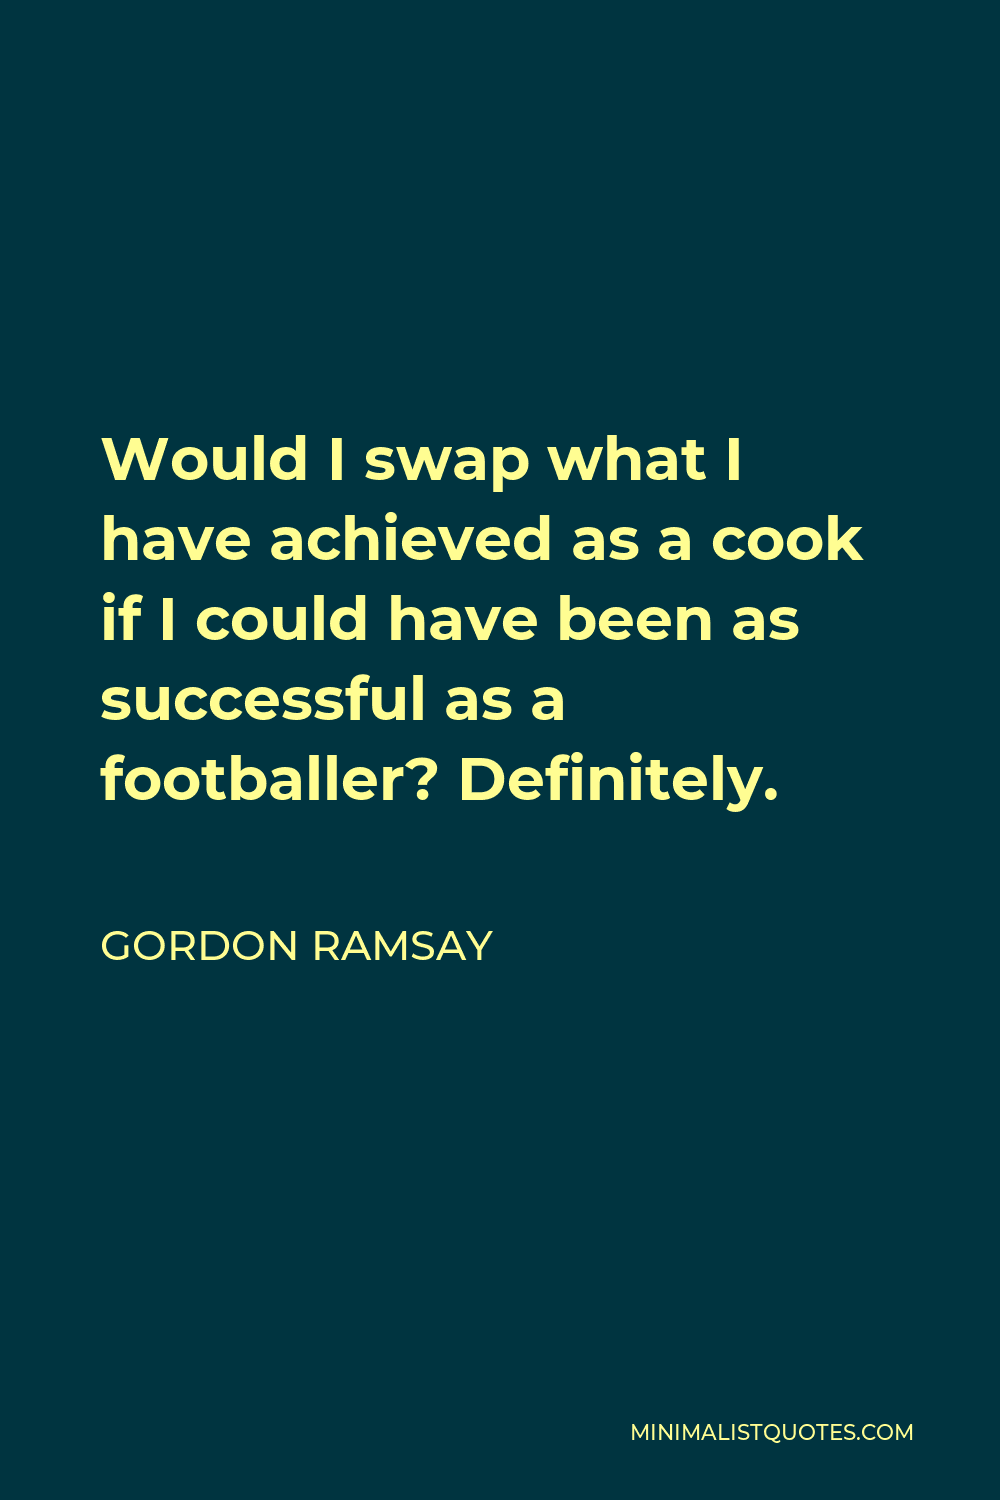 Gordon Ramsay Quote: Would I swap what I have achieved as a cook if I could  have been as successful as a footballer? Definitely.